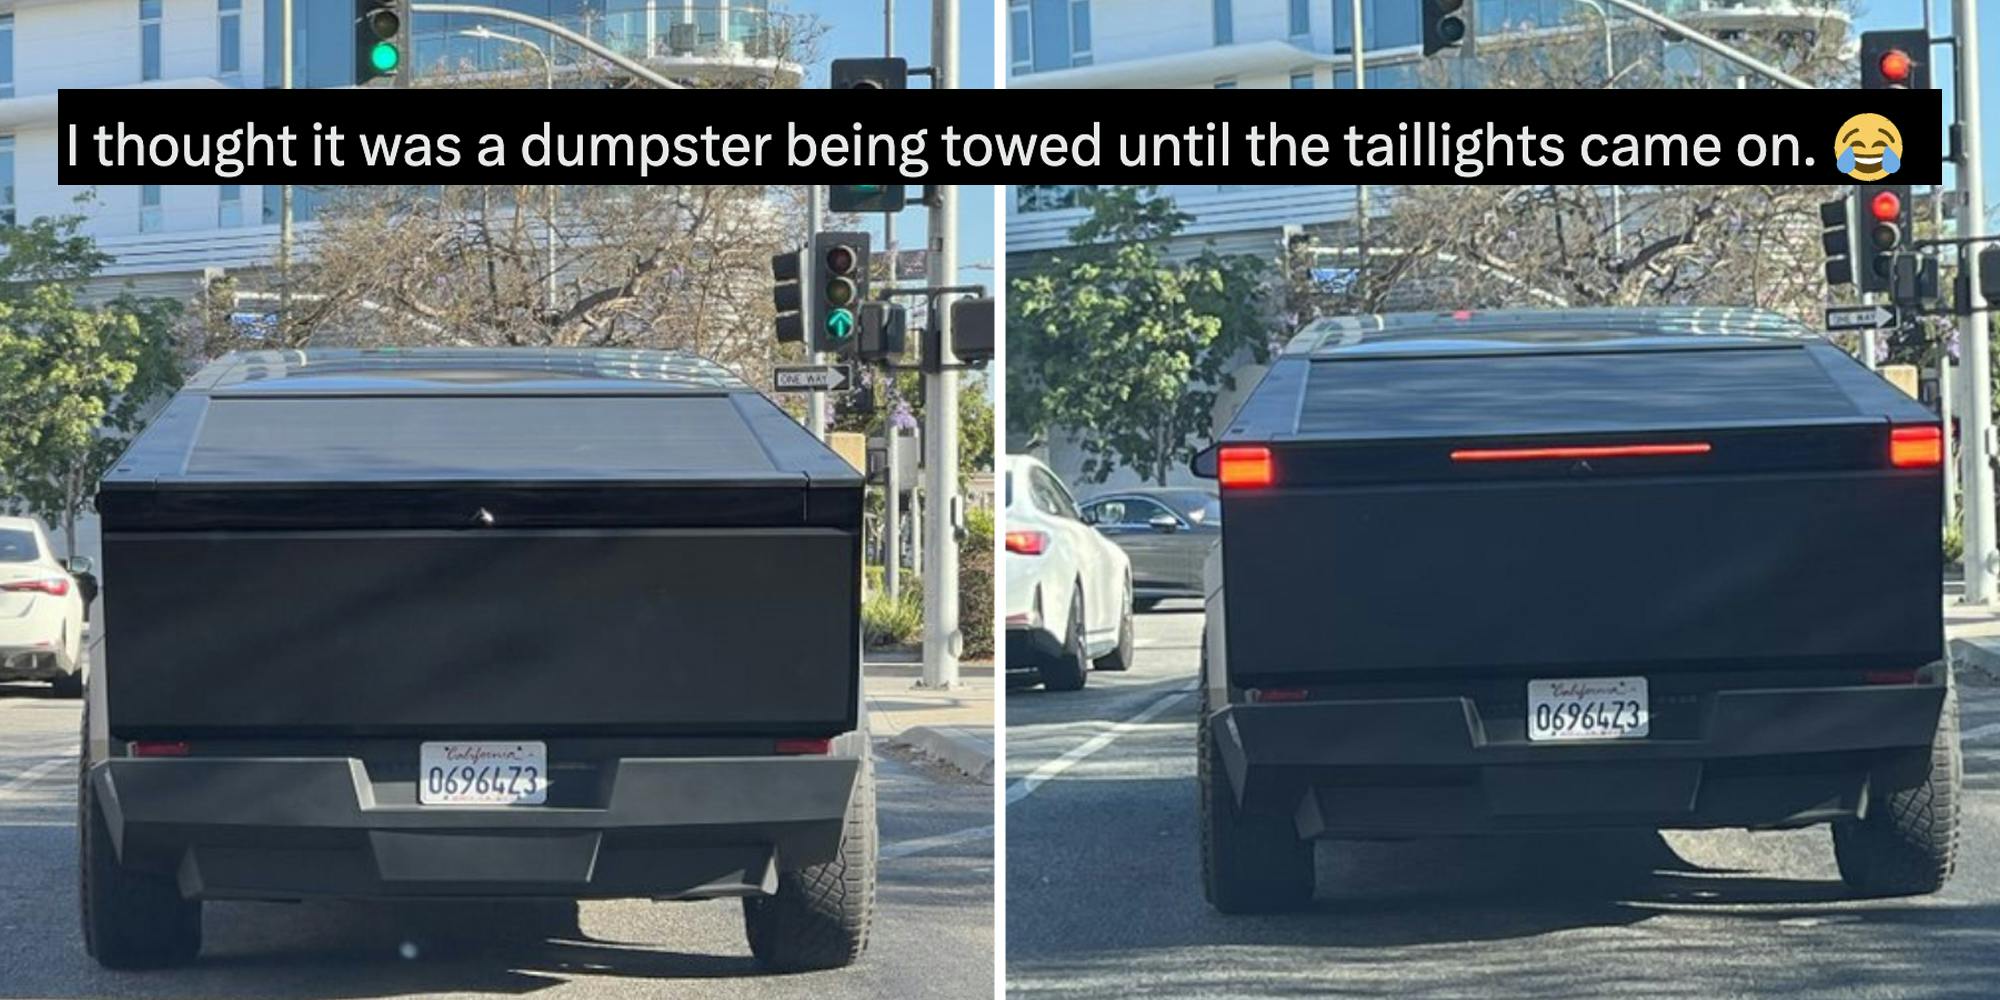 Tesla cybertruck two split with text that says "i thought it was a dumpster being towed until the taillights came on."